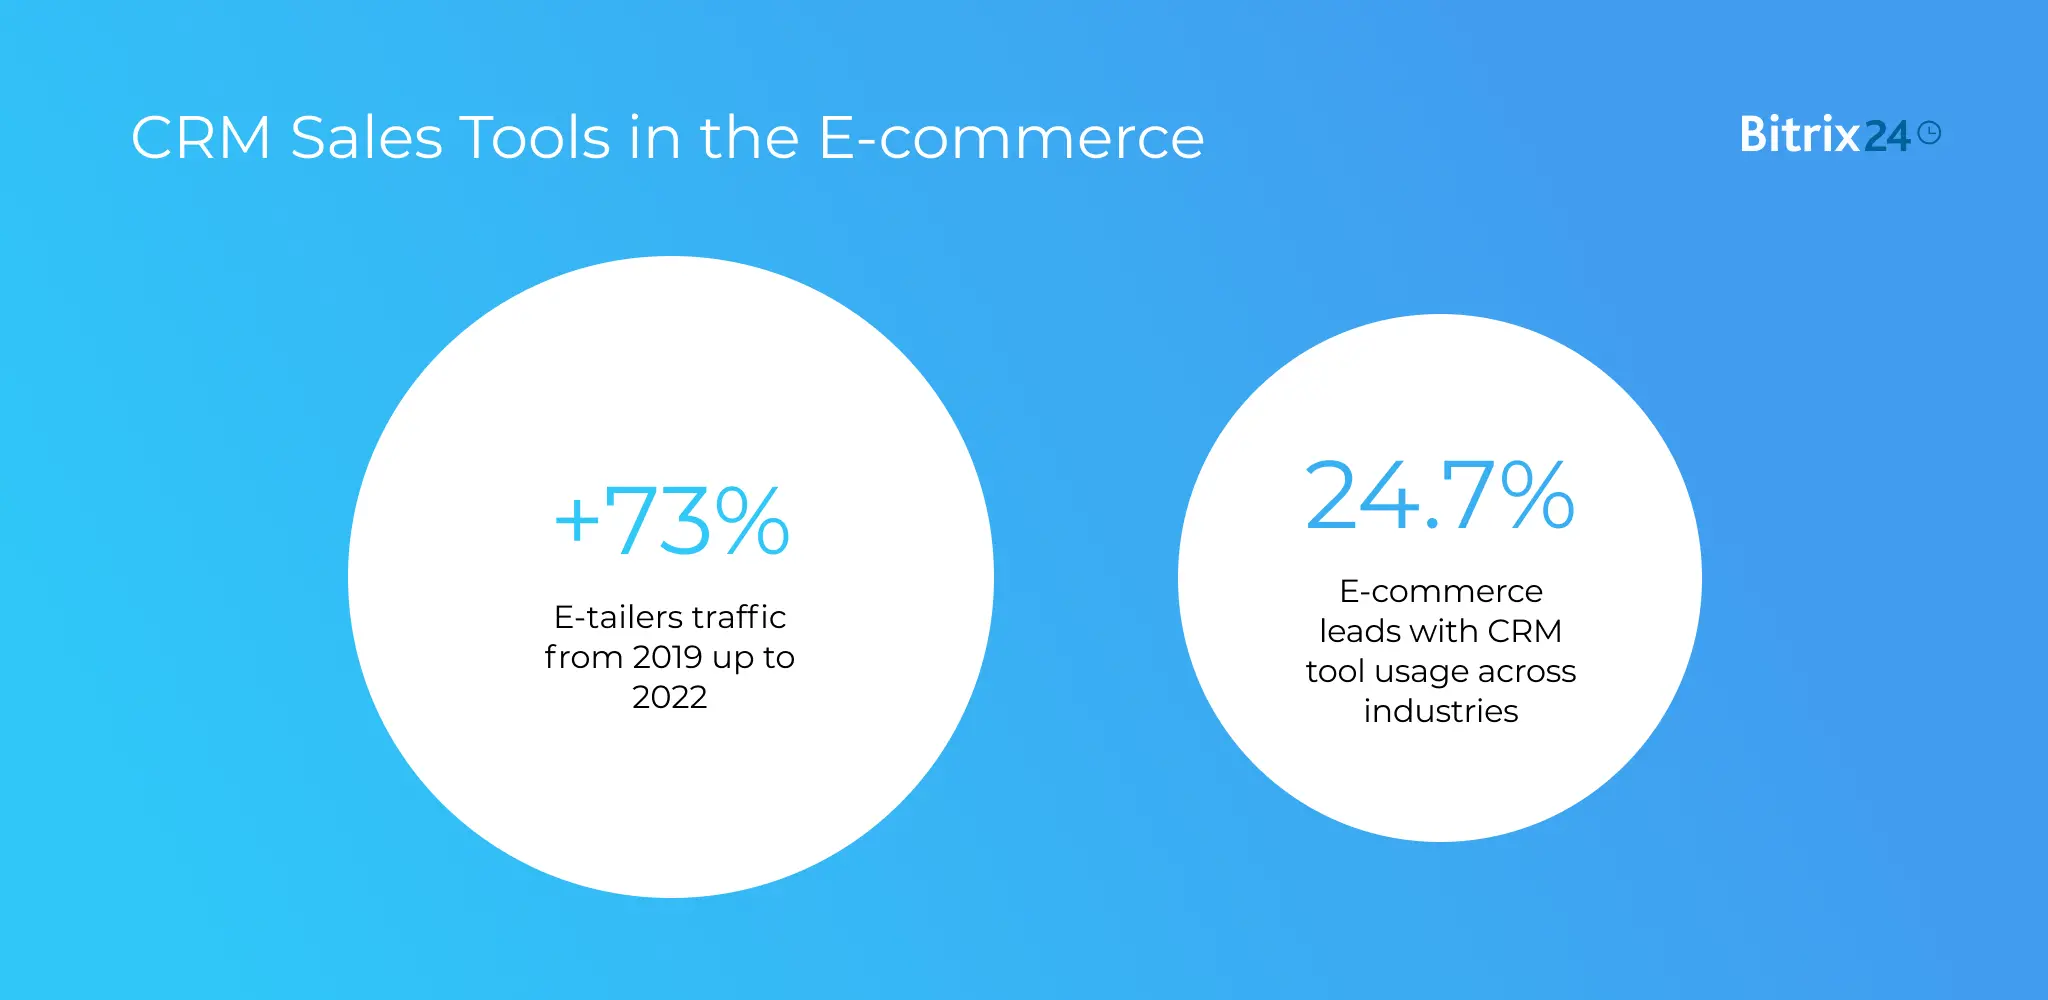 CRM Sales Tools in the E-commerce